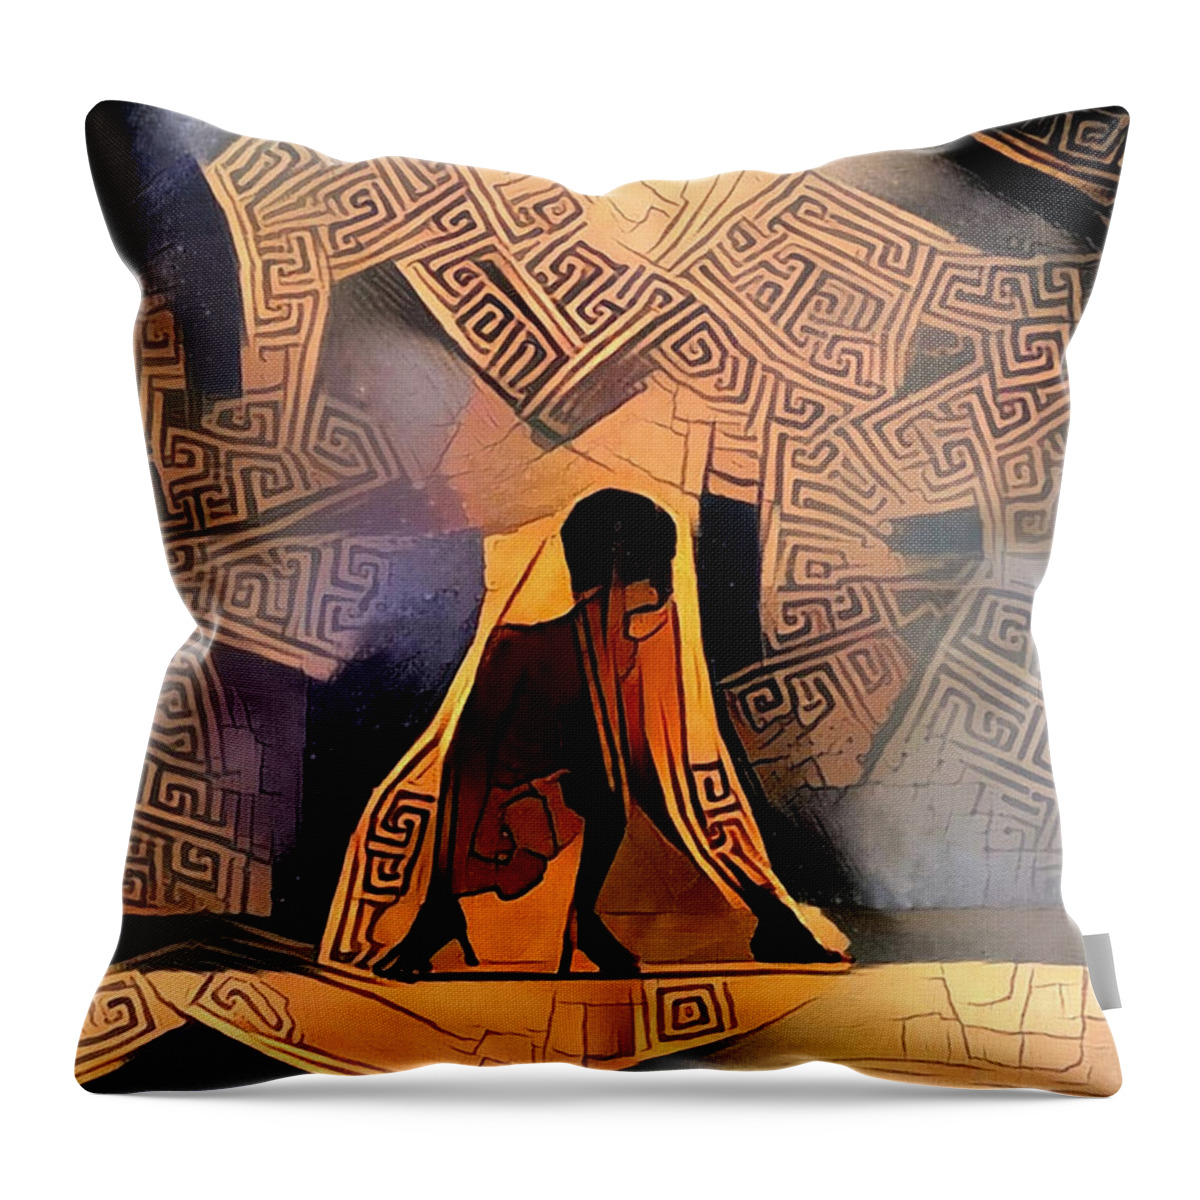 Naked Throw Pillow featuring the digital art Antique by Bruce Rolff